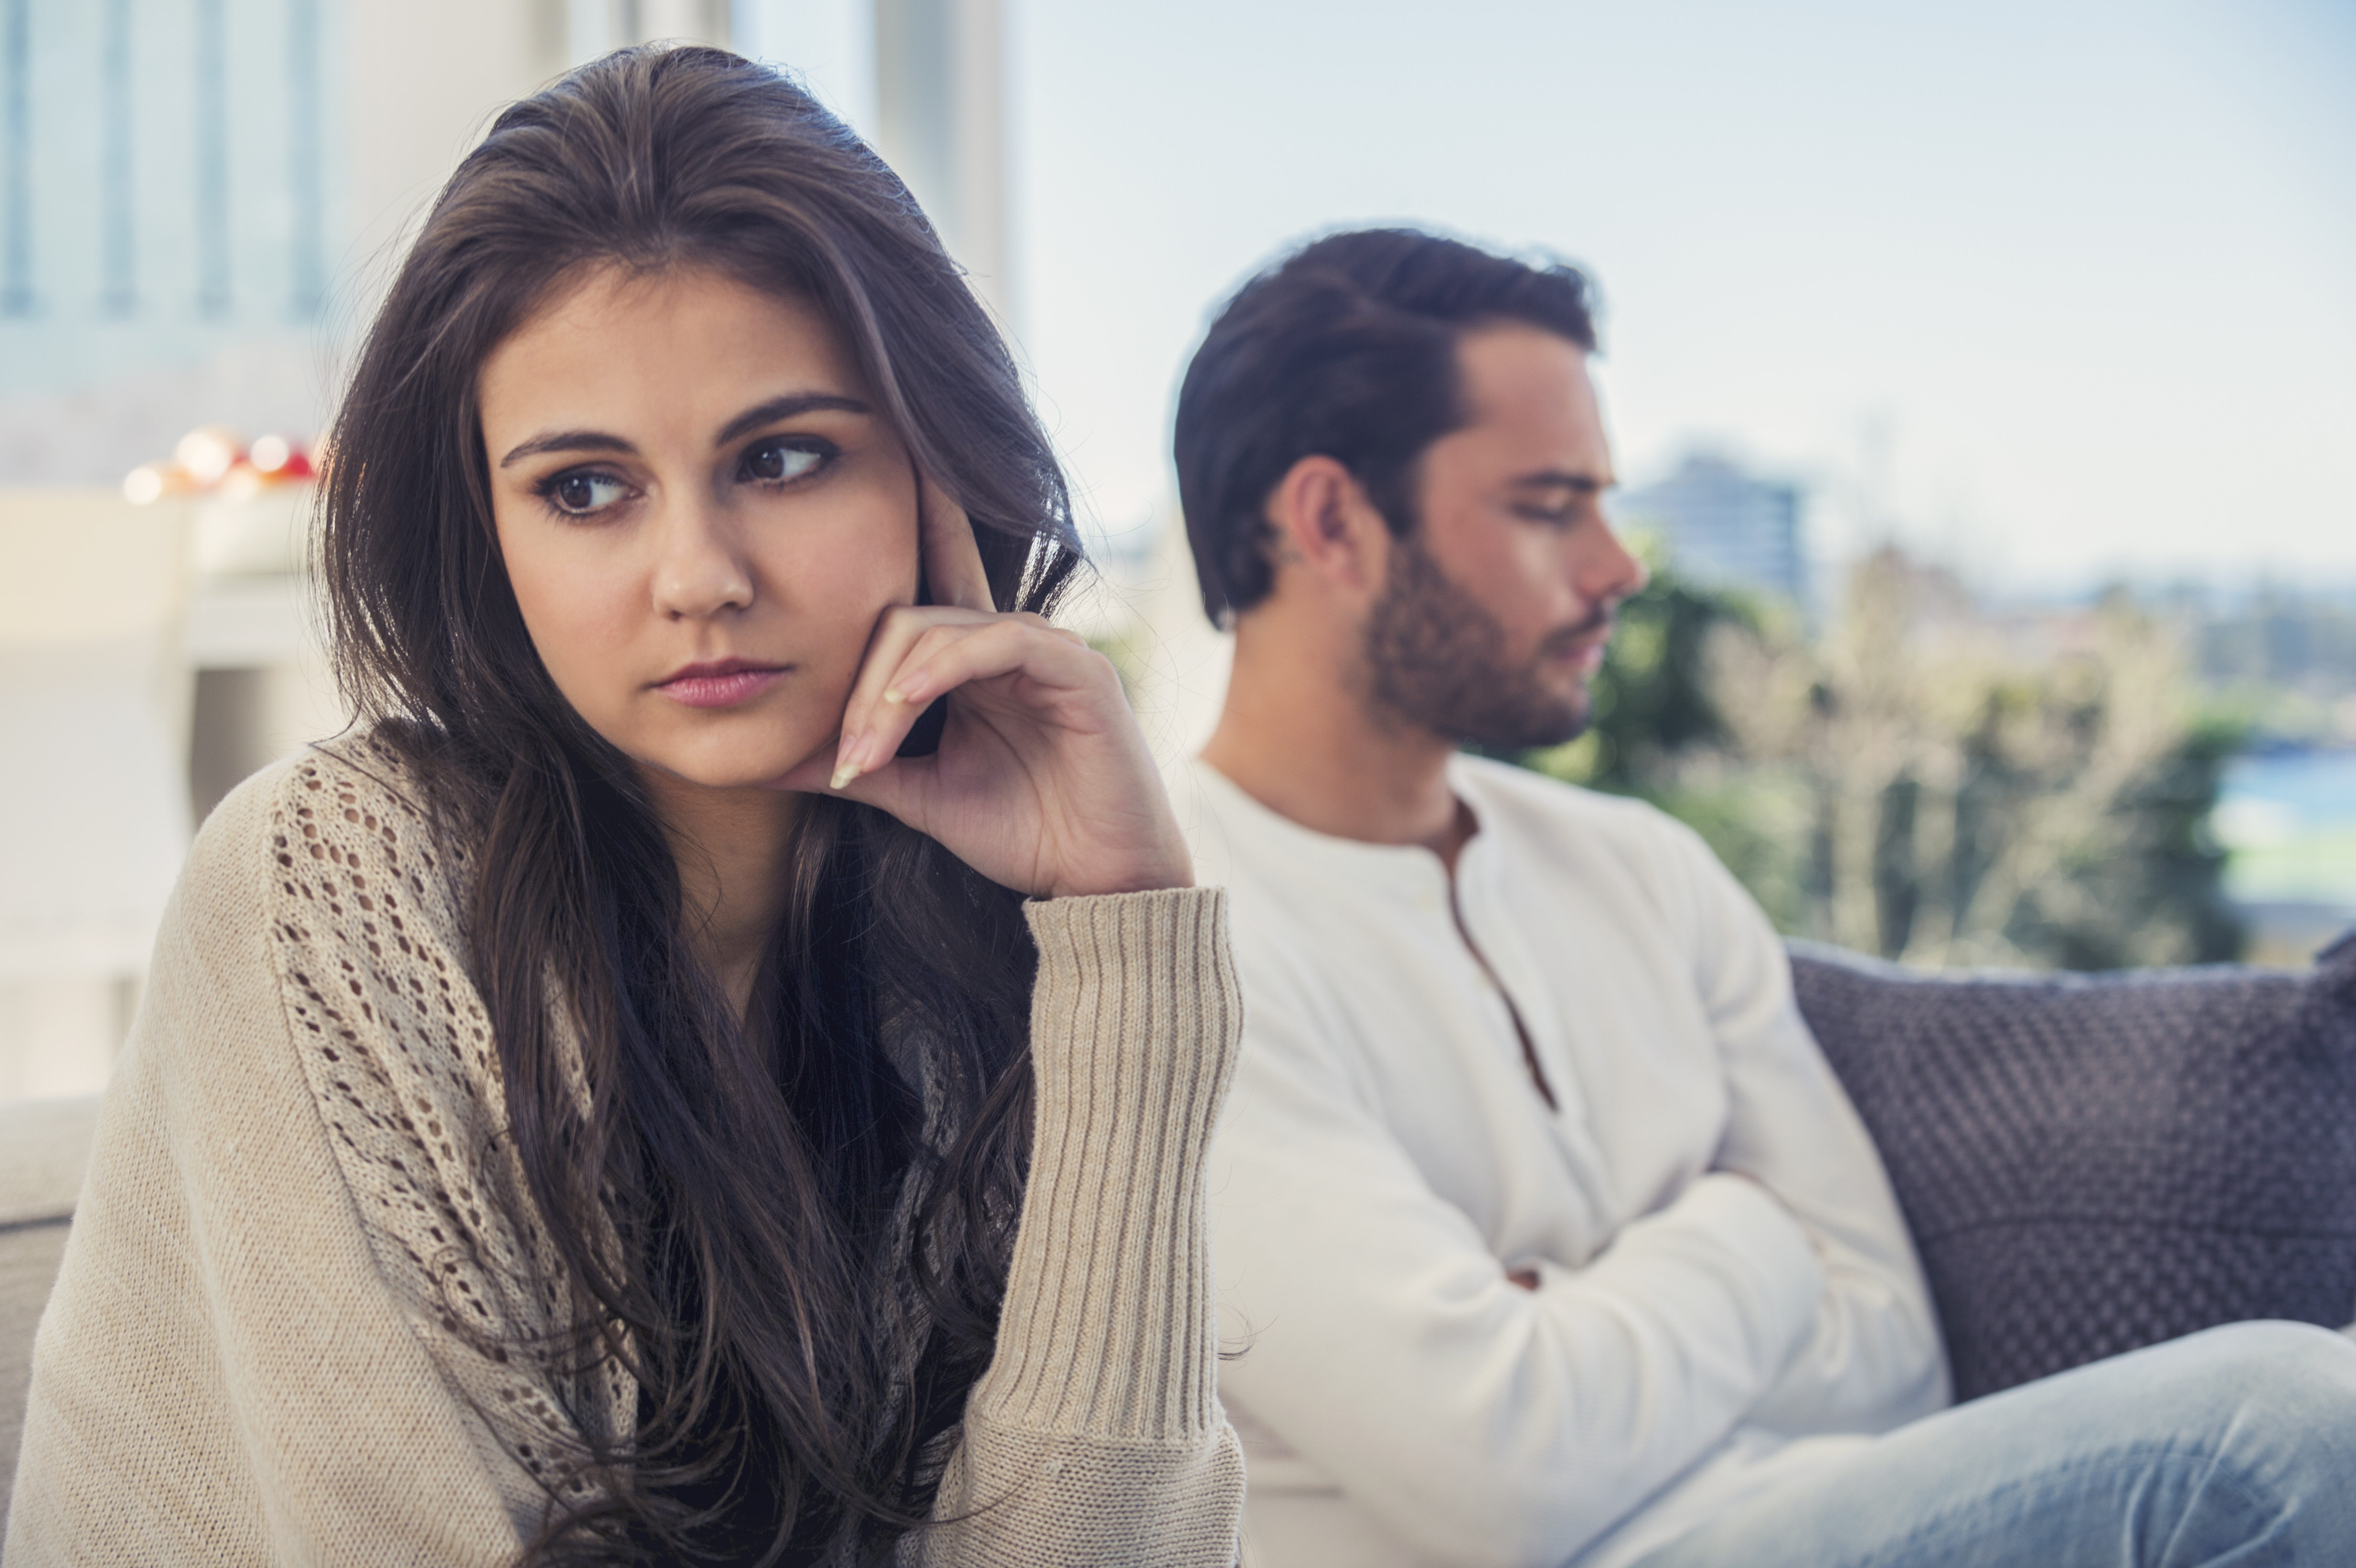 Should I Break Up With My Boyfriend Now And End Our Relationship?